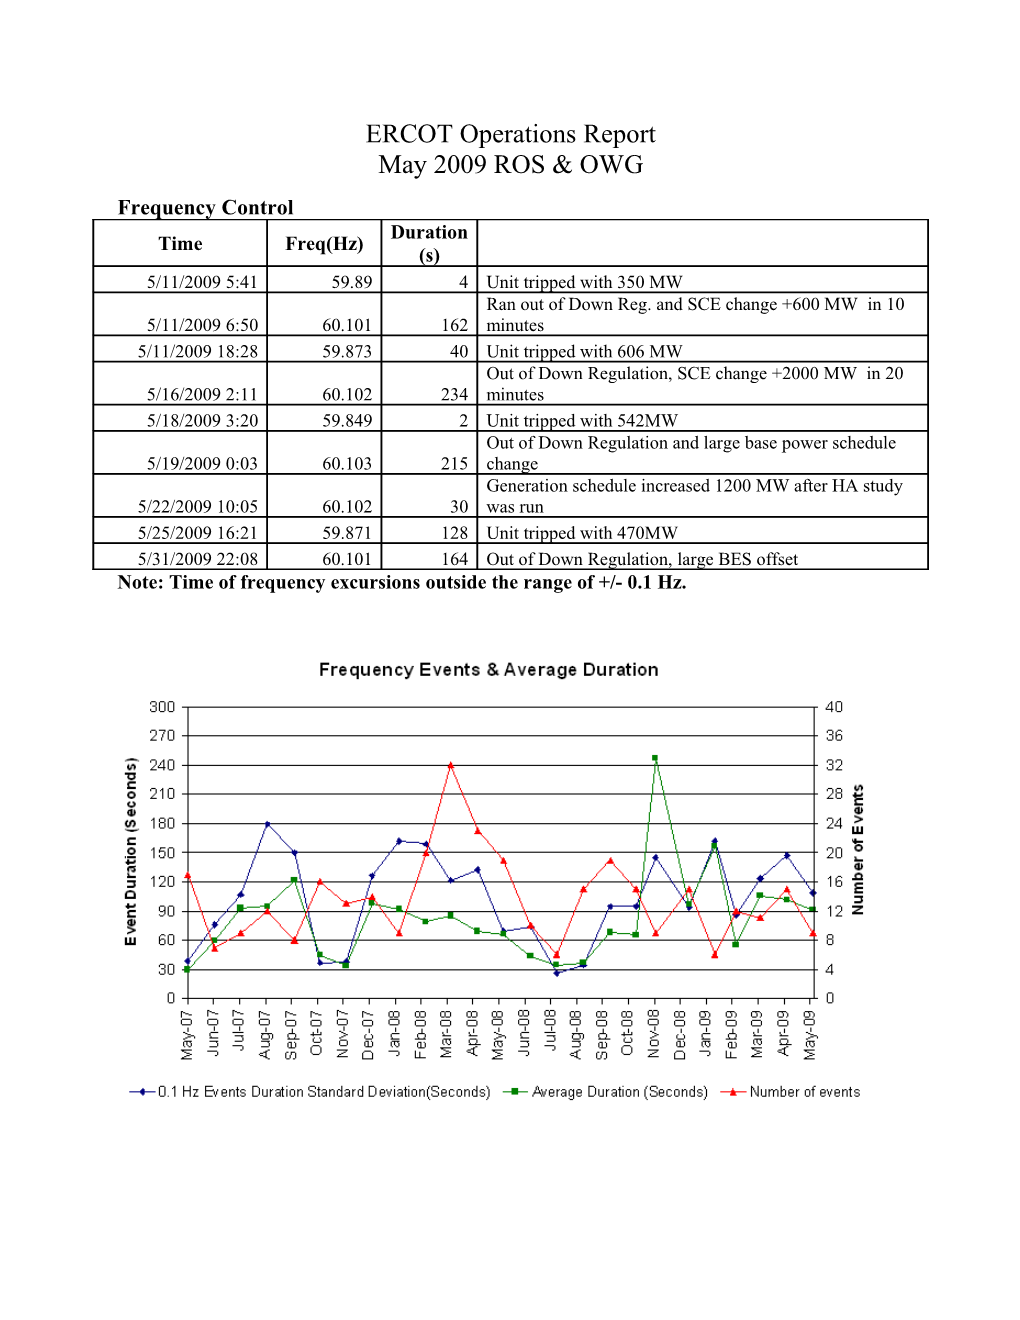 ERCOT Operations Report s5